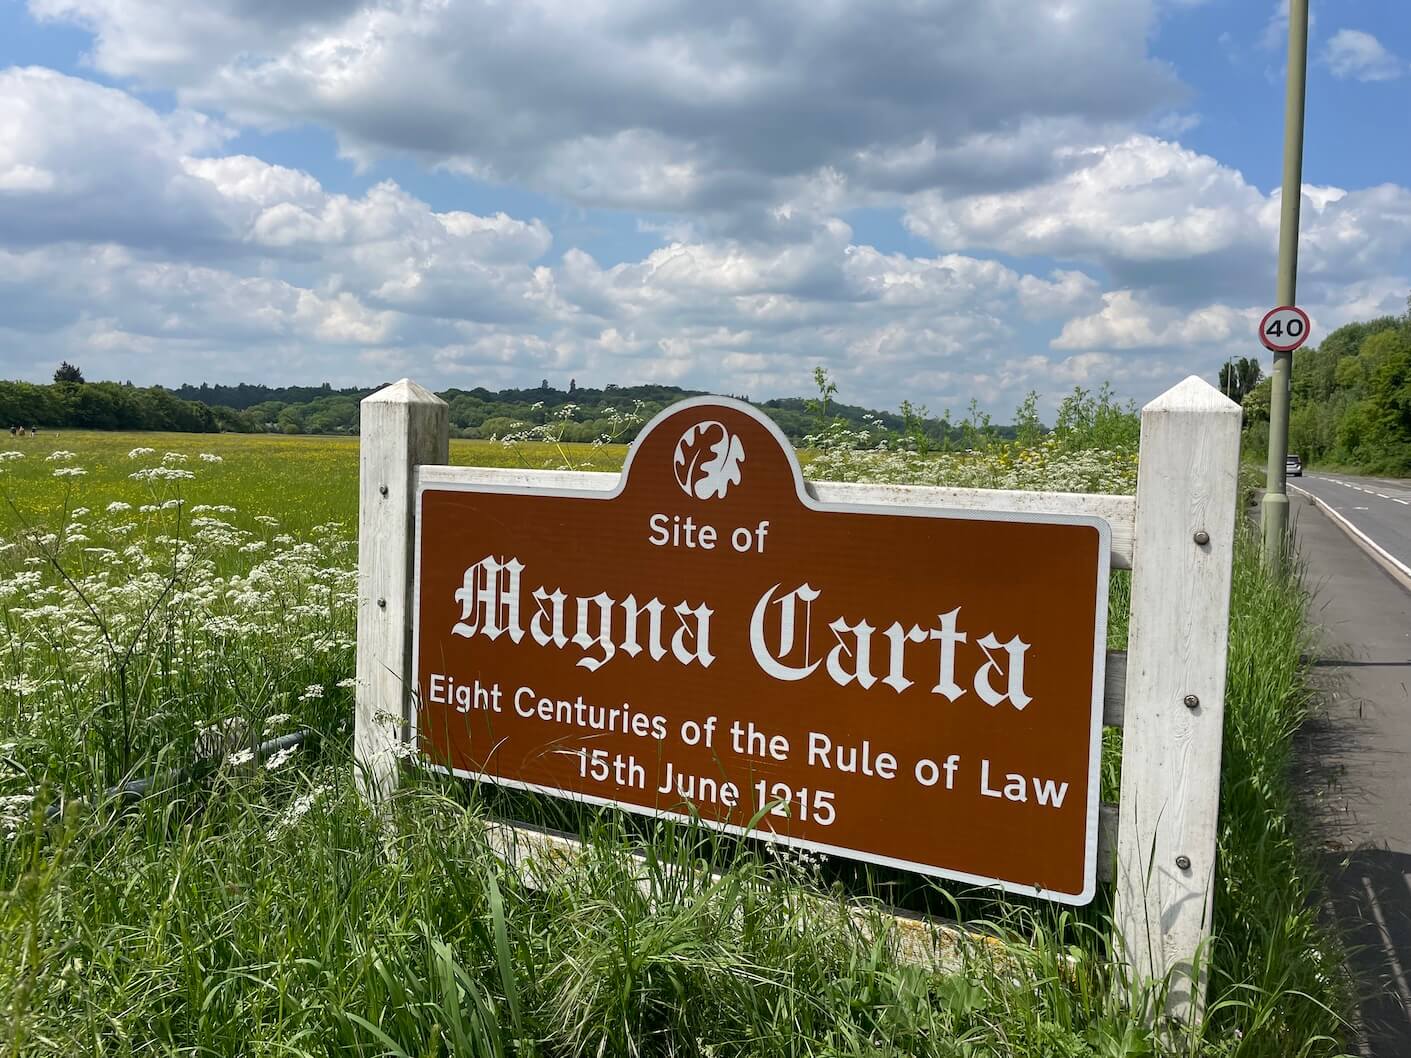 the sign showing the site of the Magna Carta which is just outside the entrance to The Runnymede hotel and spa